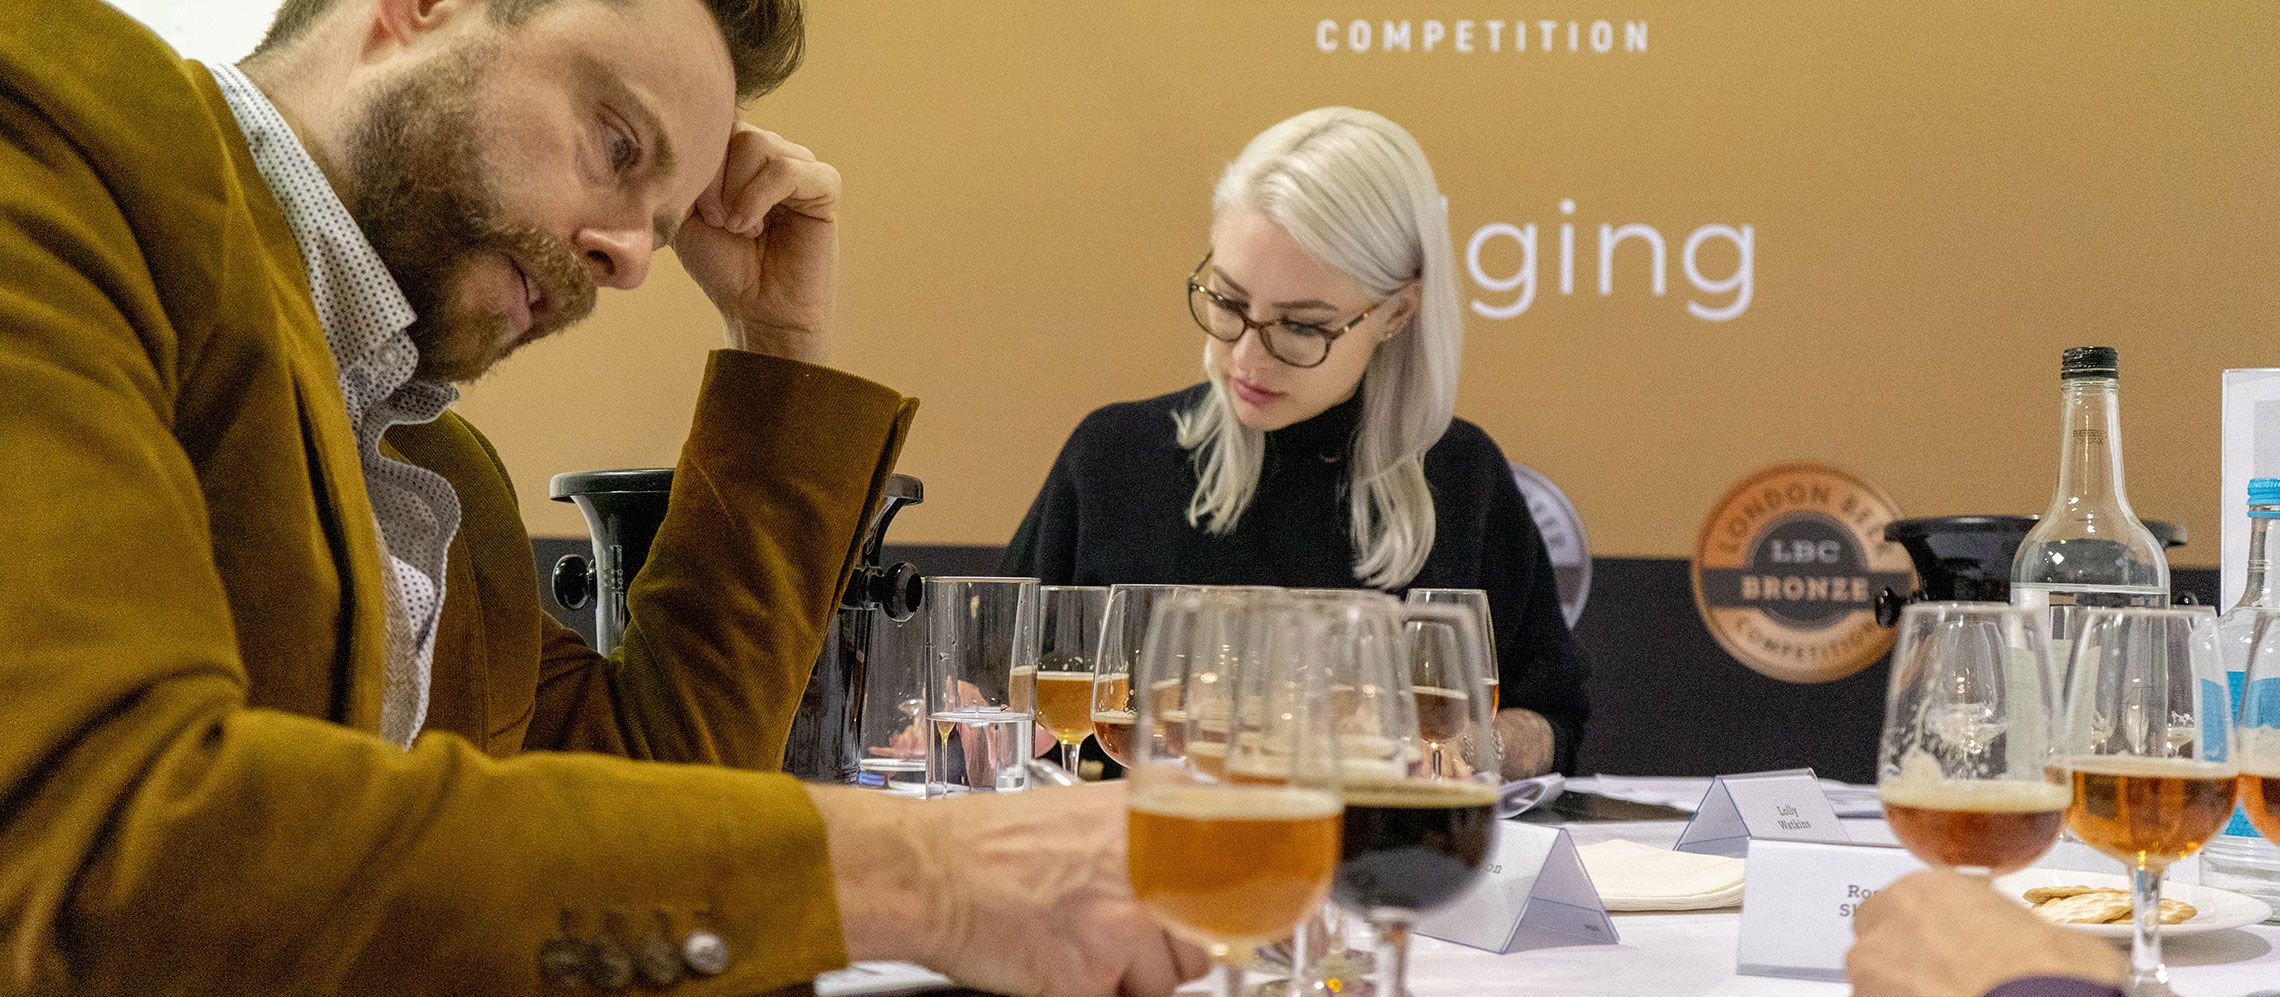 Photo for: The Global Impact Of The London Beer Competition